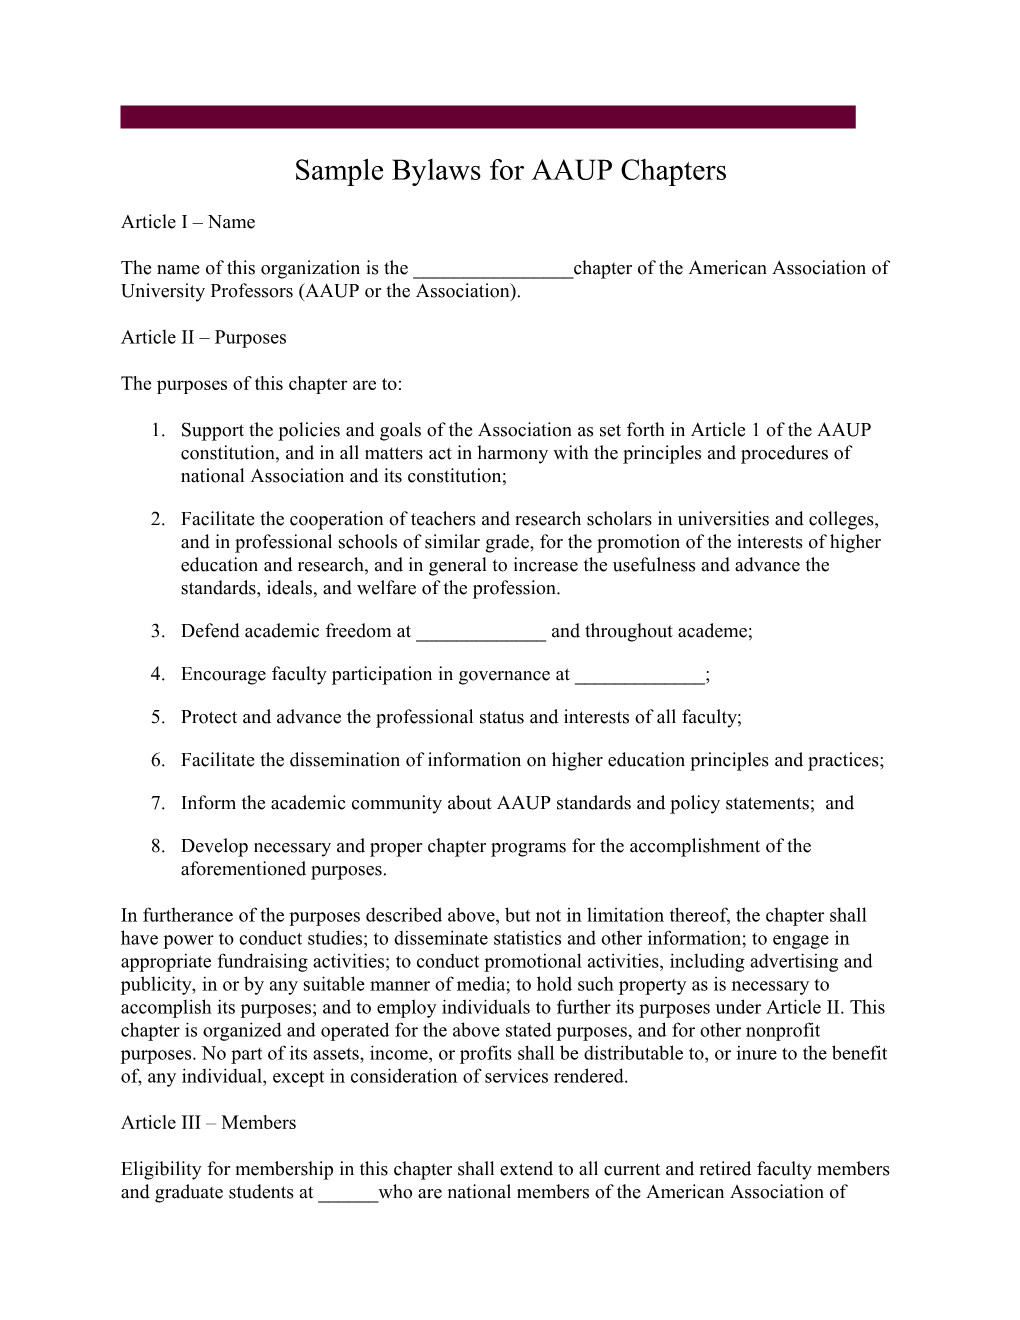 Recommended Bylaws for AAUP Chapters